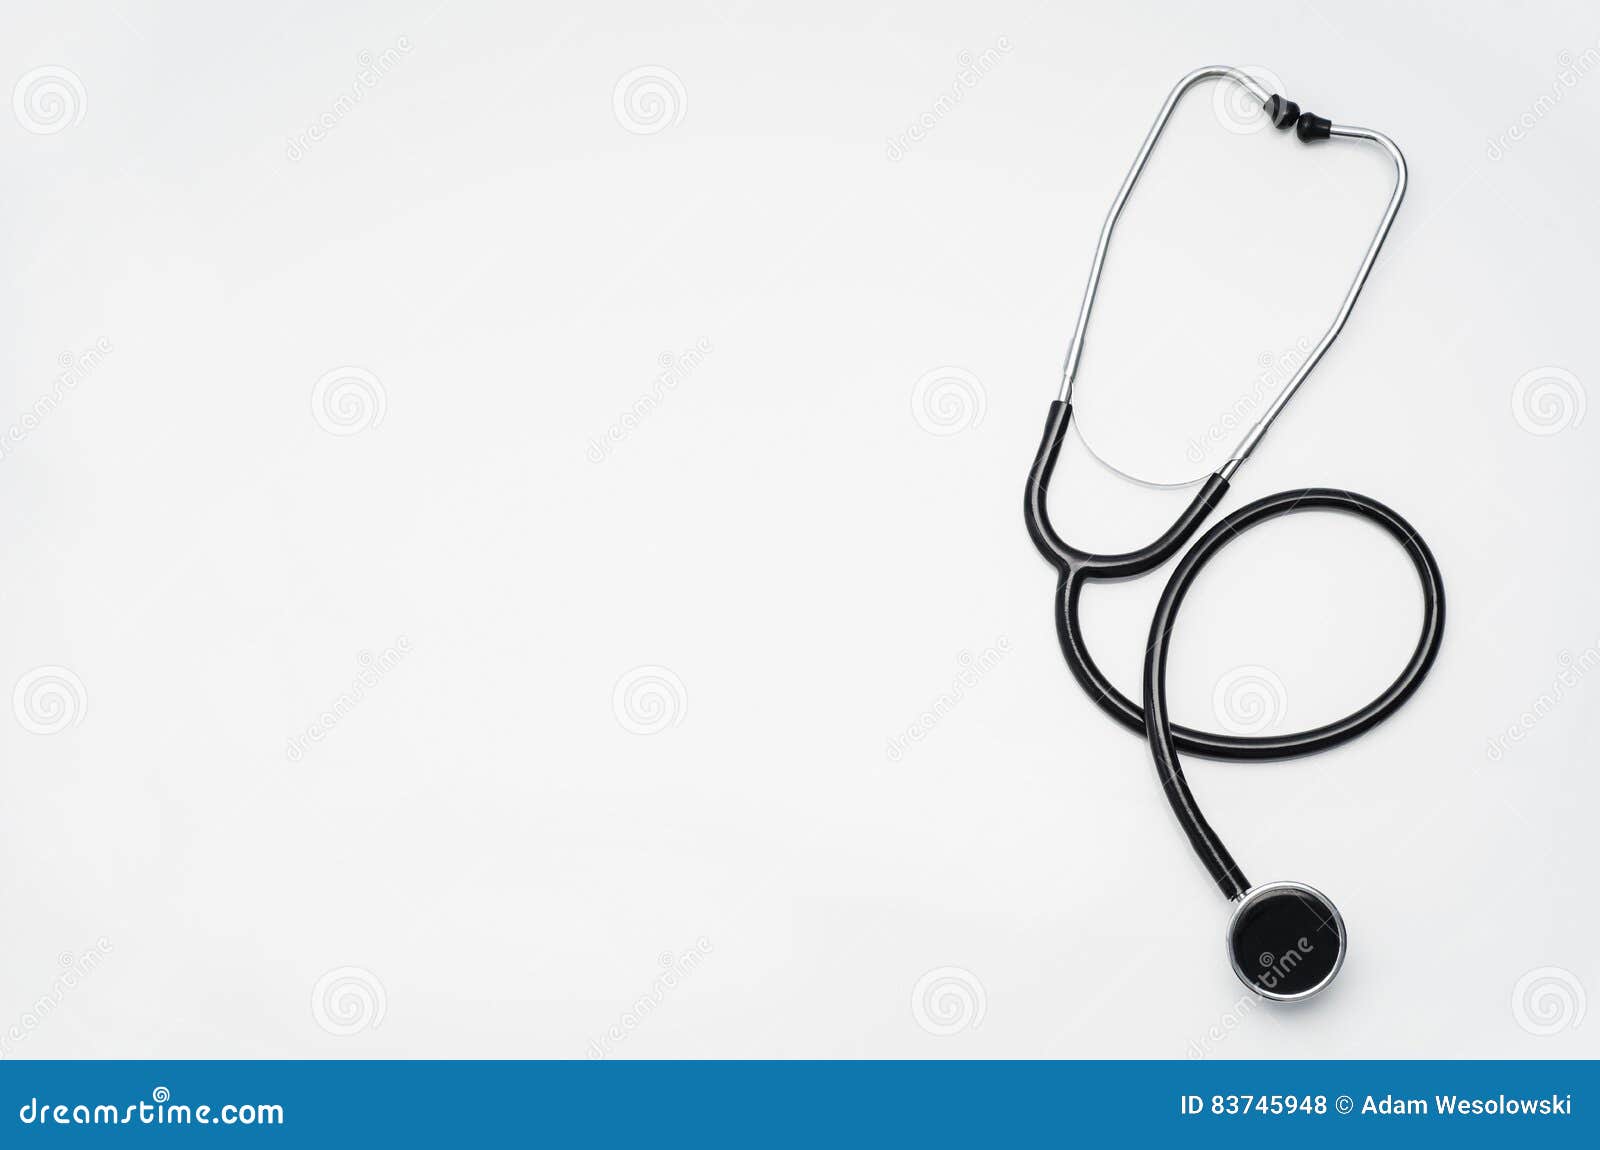 Desk with Medical Accessories and Products. Top View Stock Photo - of desk, treatment: